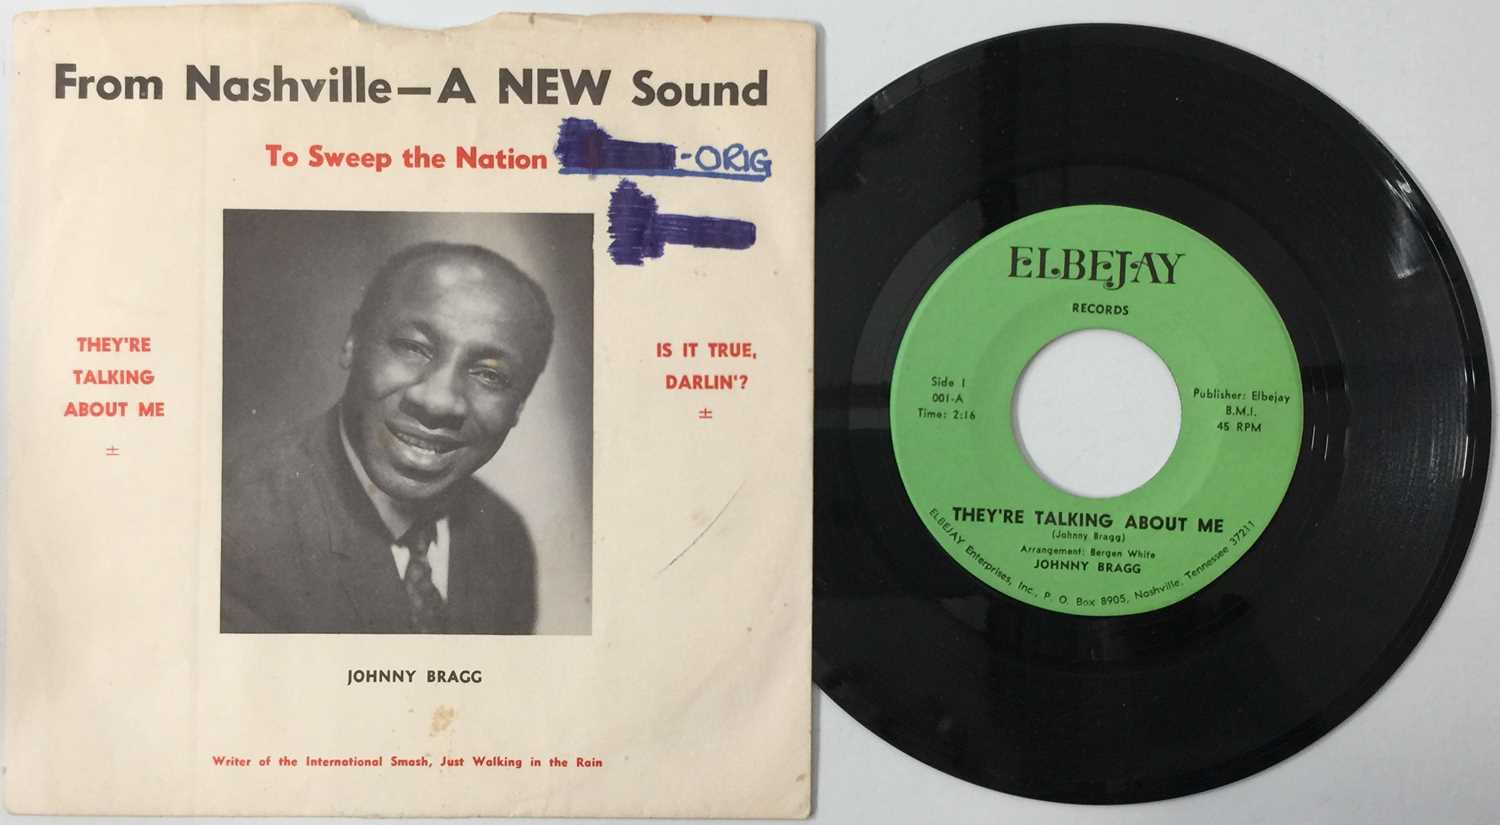 JOHNNY BRAGG - THEY'RE TALKING ABOUT ME 7" (US OG W/ PS - ELBEJAY - 001)